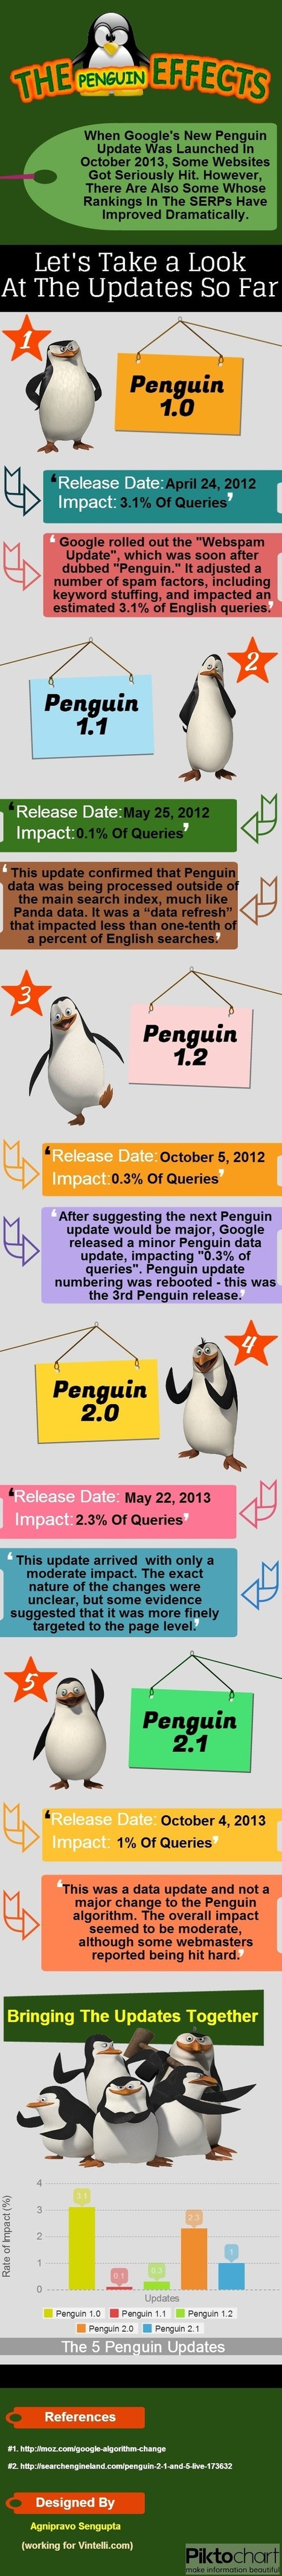 Google Penguin: Its Impact On Search Results & Internet Marketing [& Panguin Tool] | Must Market | Scoop.it